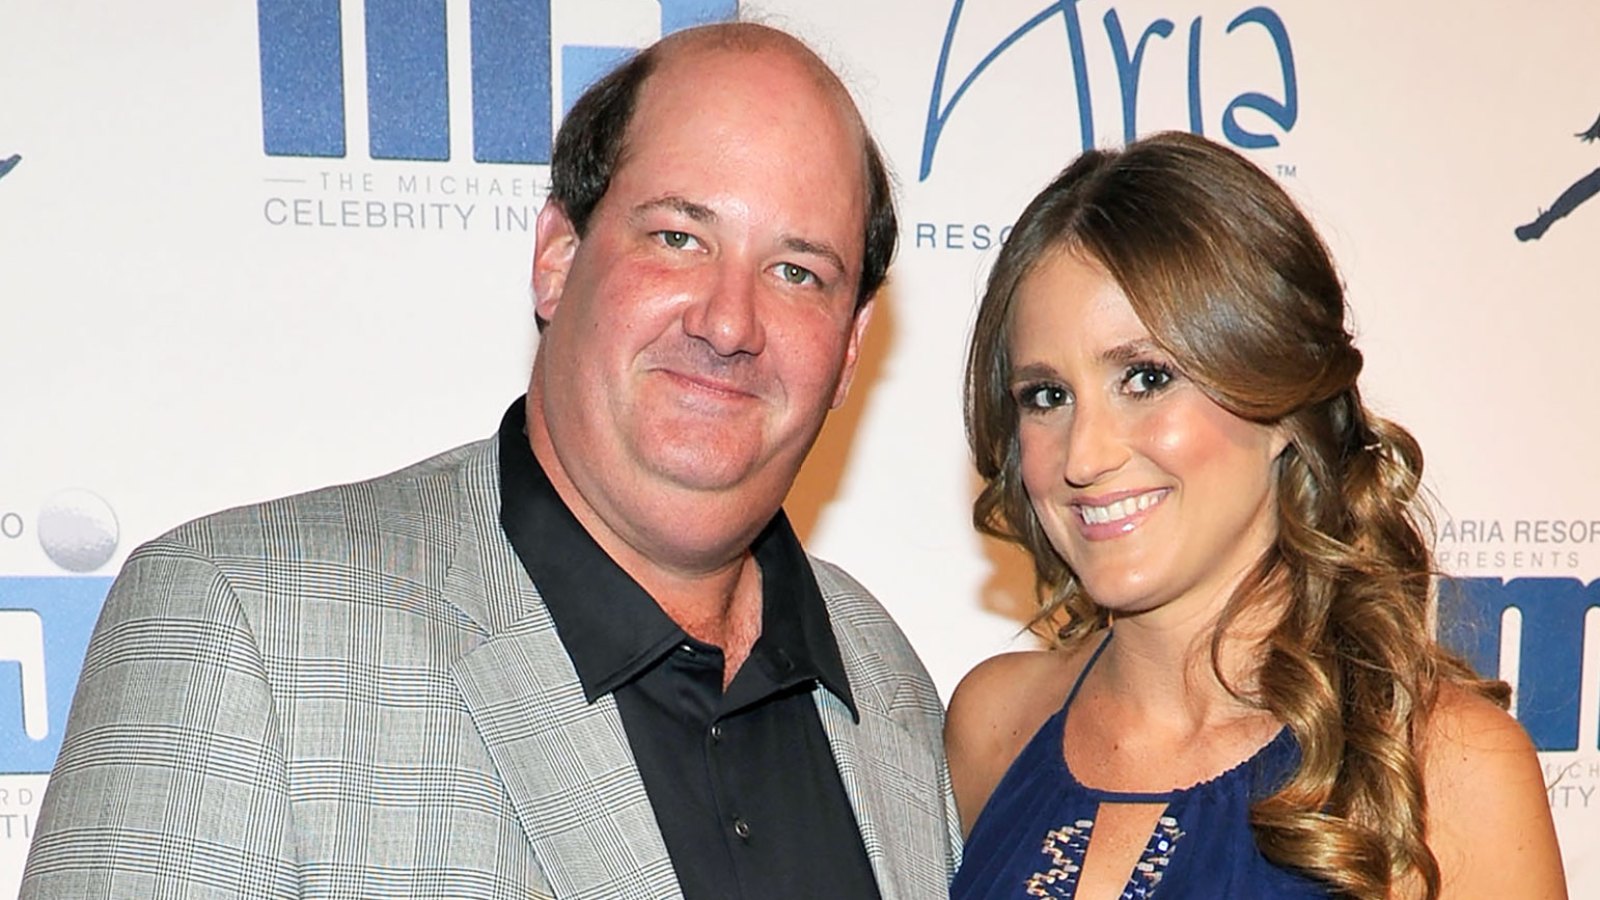 Brian Baumgartner Welcomes First Child With Wife: Baby Announcement